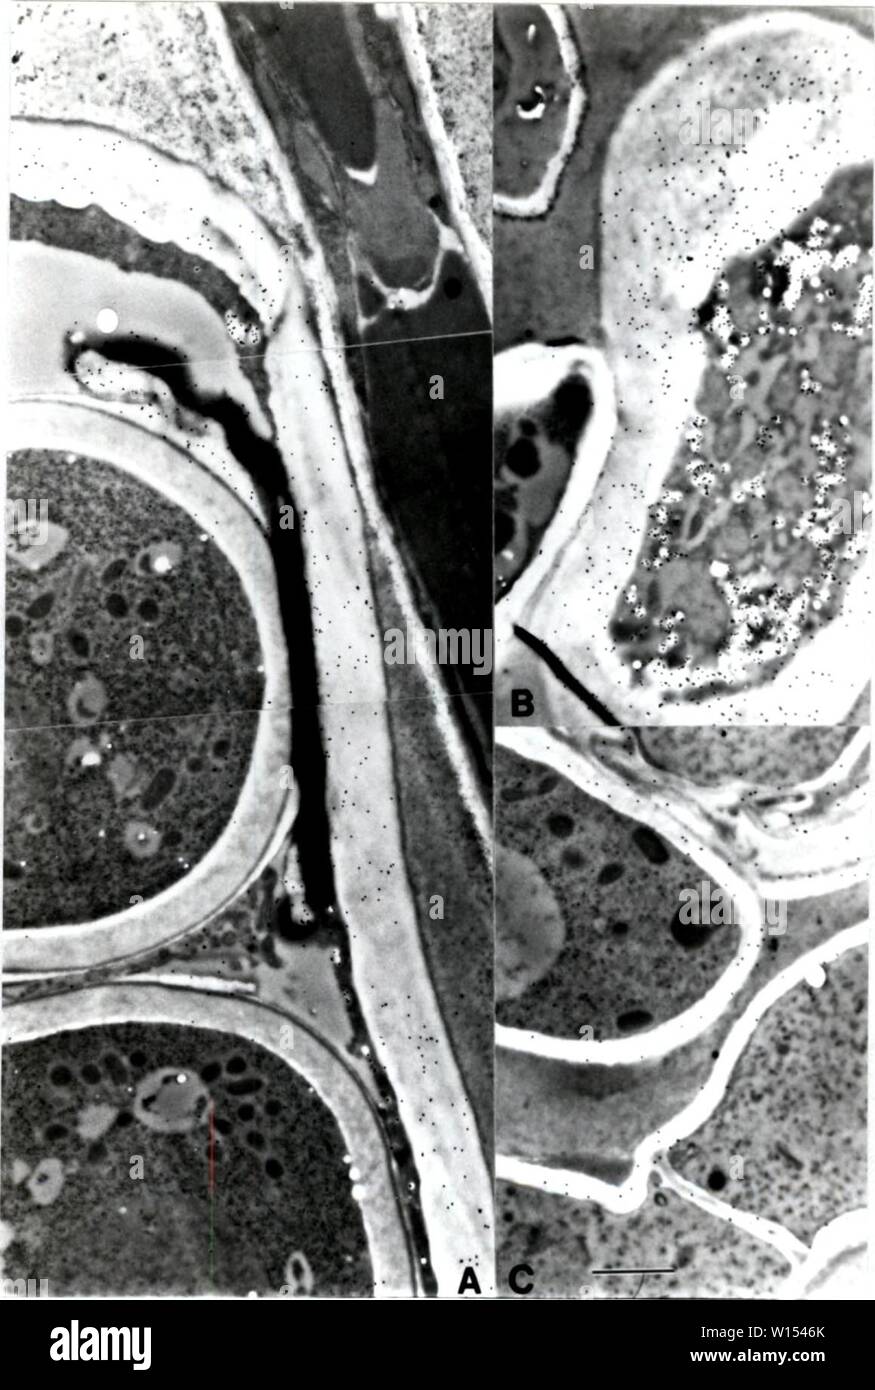 Archive image from page 111 of Development of cytochemical methods for. Development of cytochemical methods for the study of ascospore wall biogenesis and maturation . developmentofcyt00lusk Year: 1991  Tt 102    Figure 5.4. GS-II labeling on P. niqrella. A) ascus, ascospore and paraphysis labeling; B) cells of the excipular layer; C) sugar negative control. Stock Photo